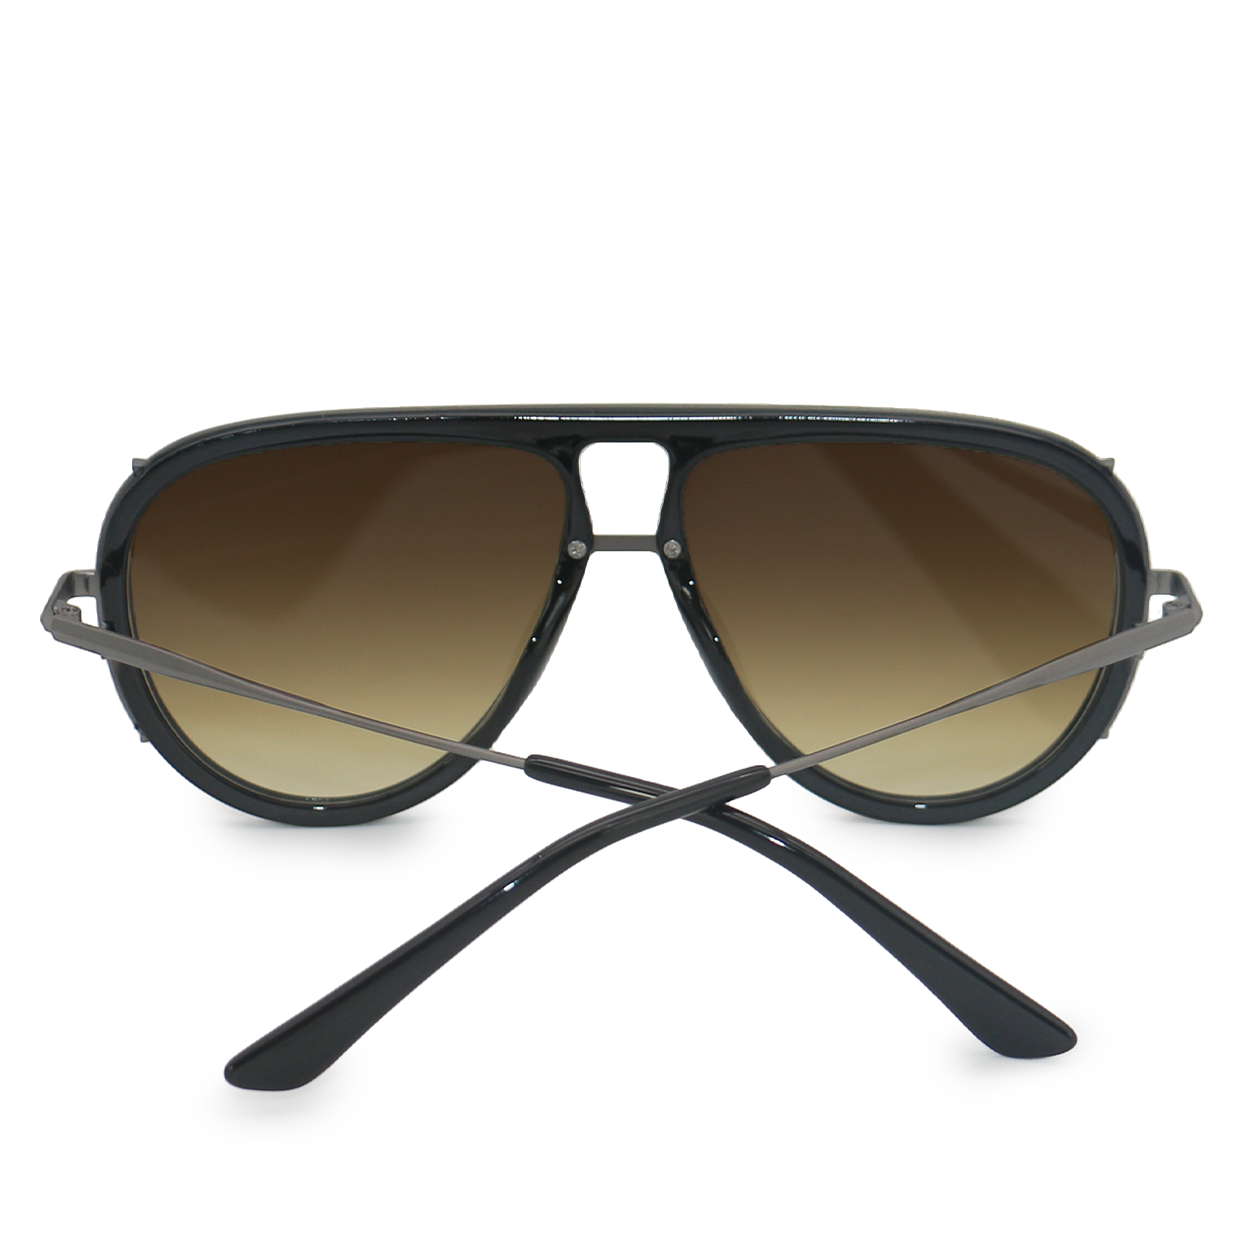 Aviator Sunglasses - Oversized sustainable sunglasses for Women - Ivy Luxe Olive - Back Details - TopFoxx